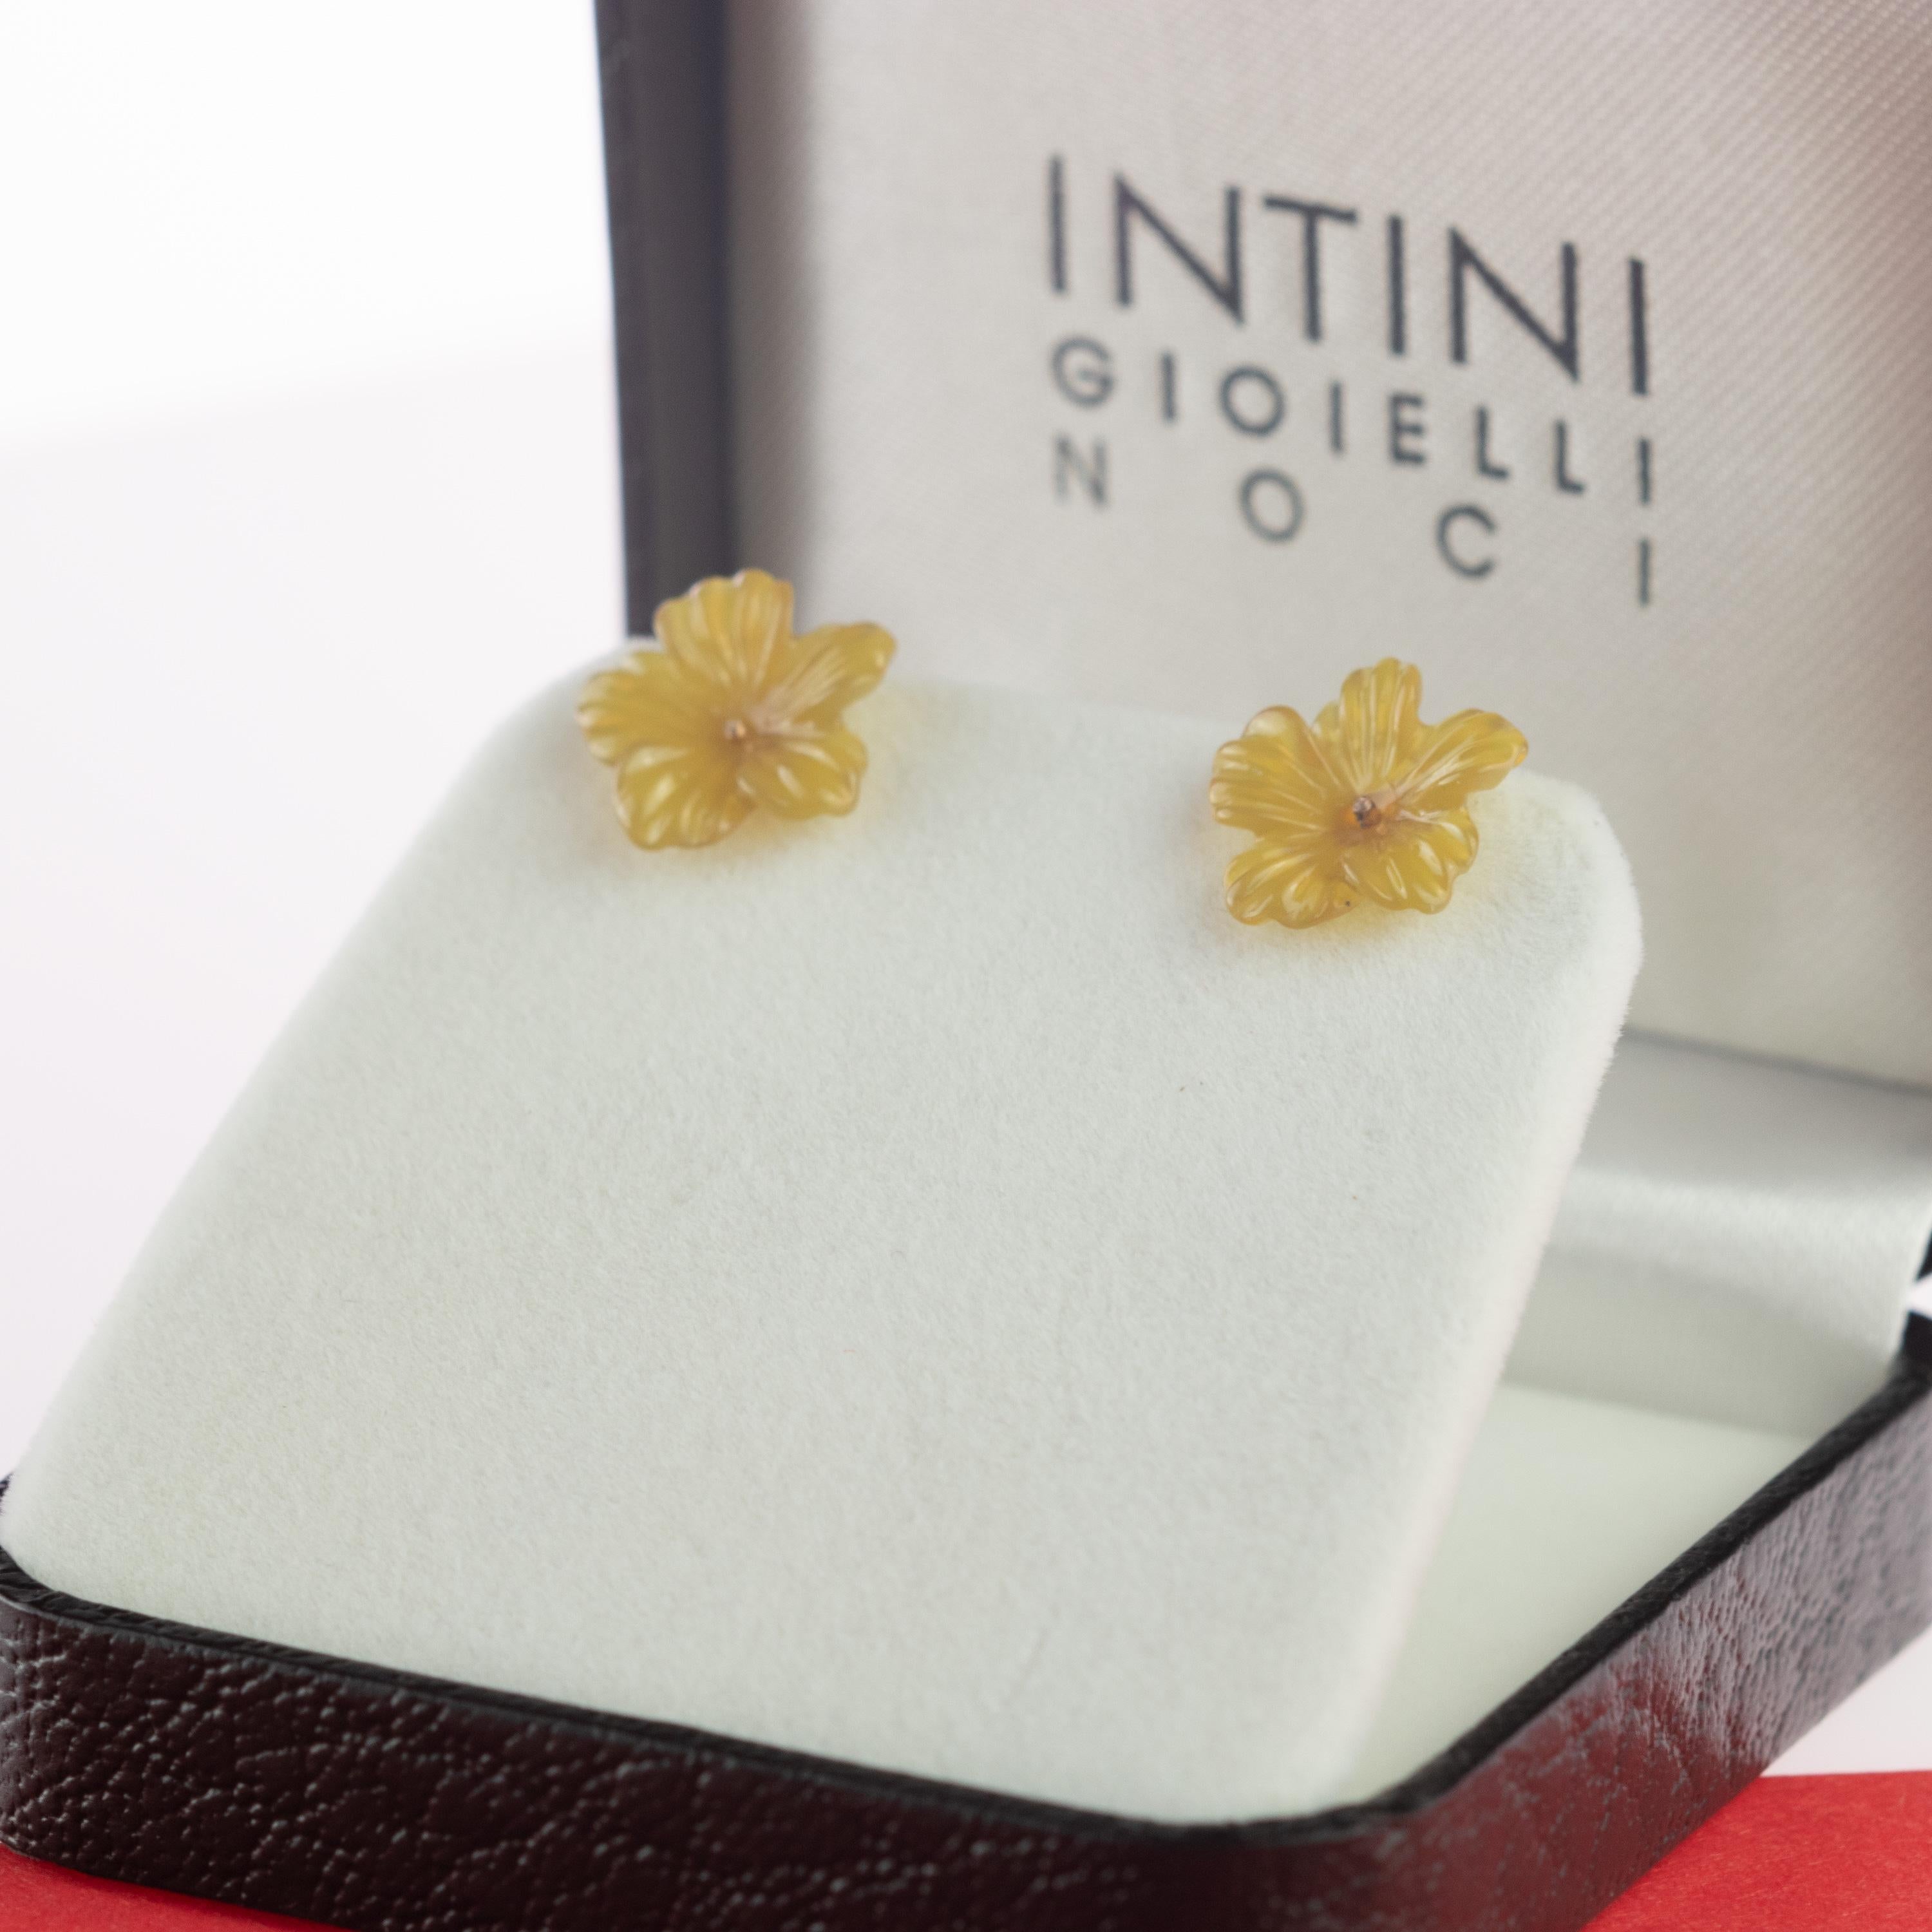 Delicate natural 5 carat yellow agate flower earrings with a marvelous transparent color. Carved petals that evoke the italian handmade traditional jewelry work embellished with 18 karat yellow gold.

The color yellow is primarily associated with